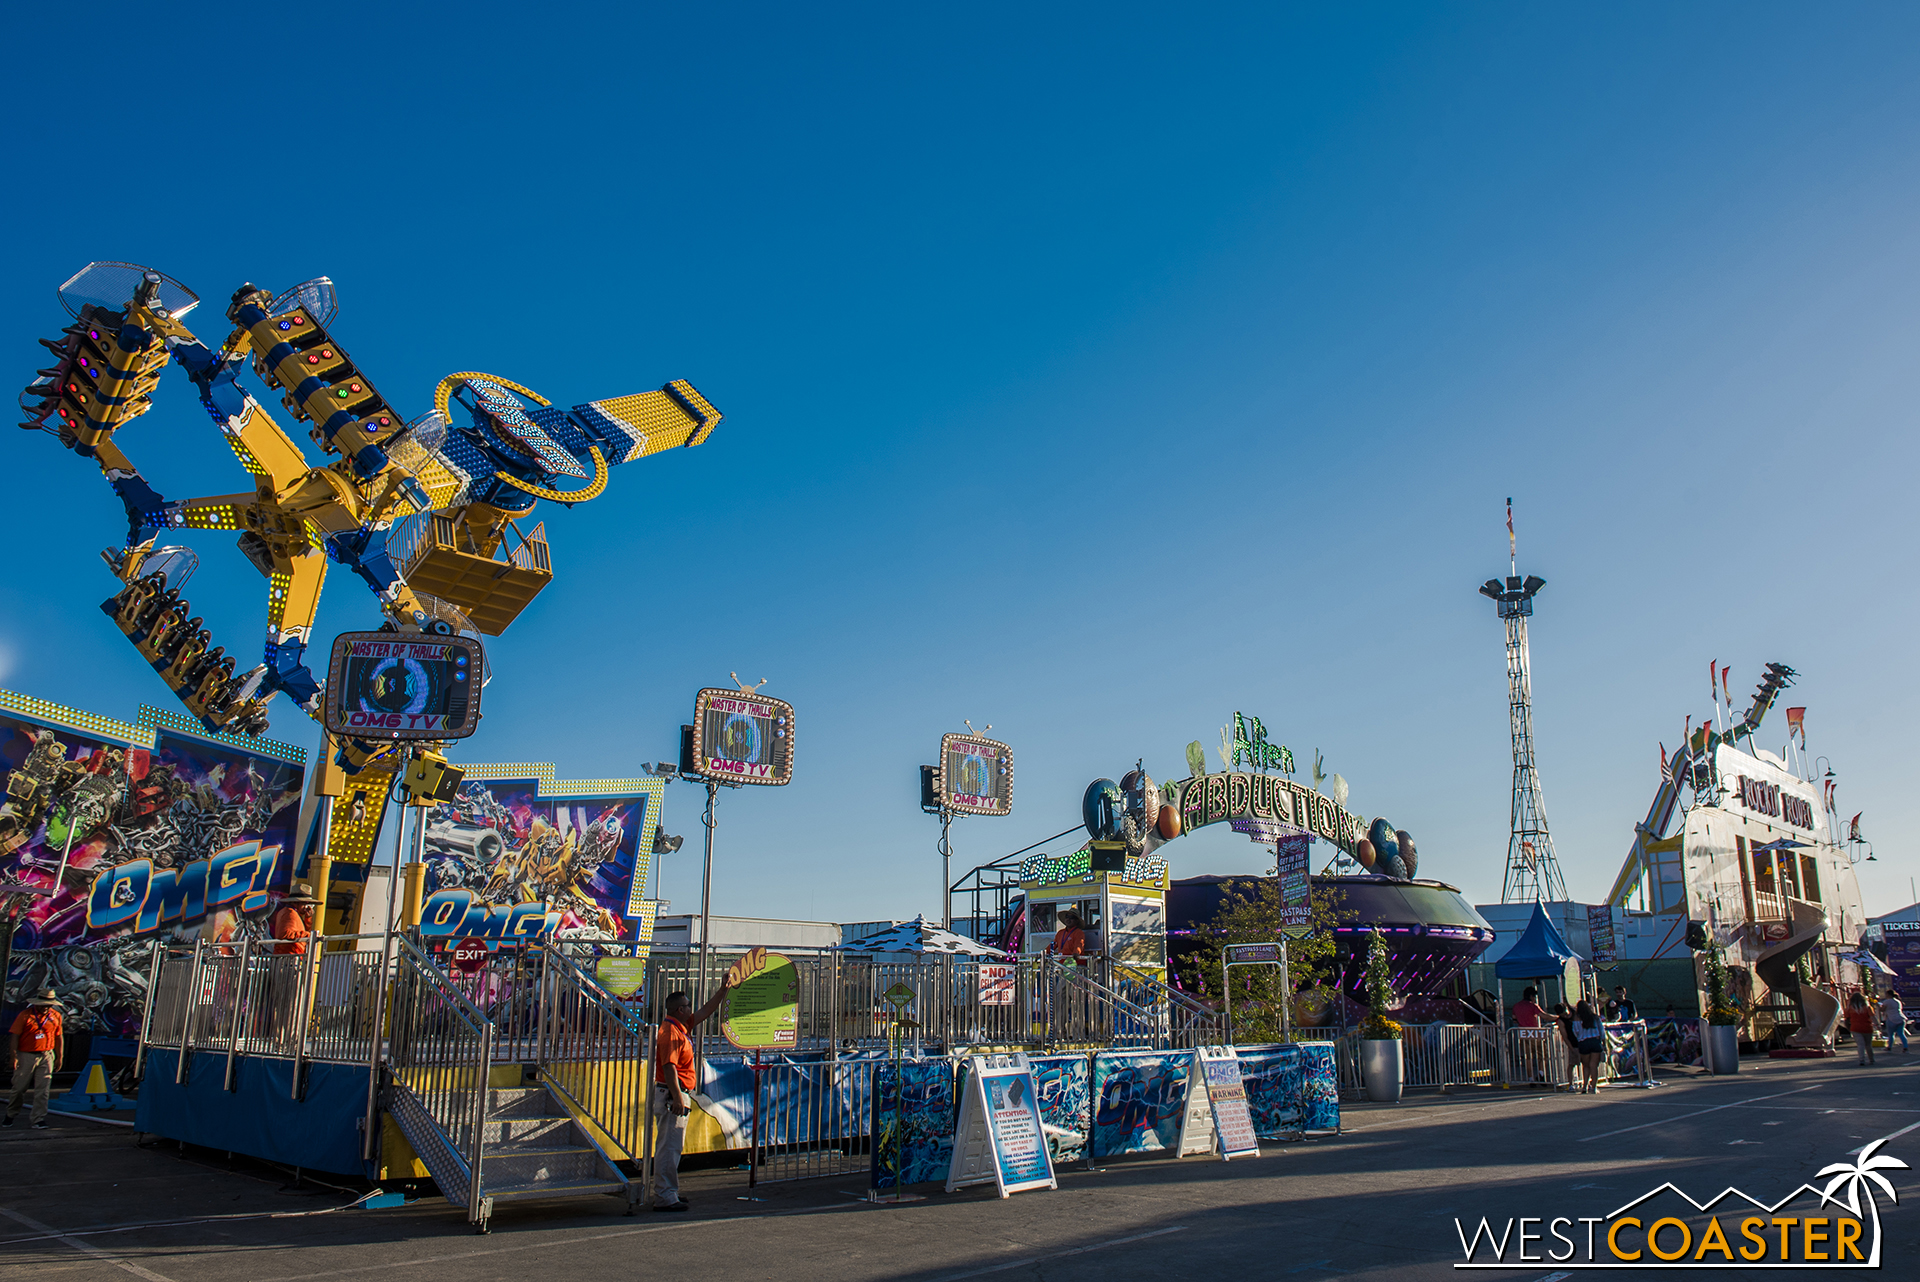  There are also more unique and extreme rides, like the OMG ride on the left. 